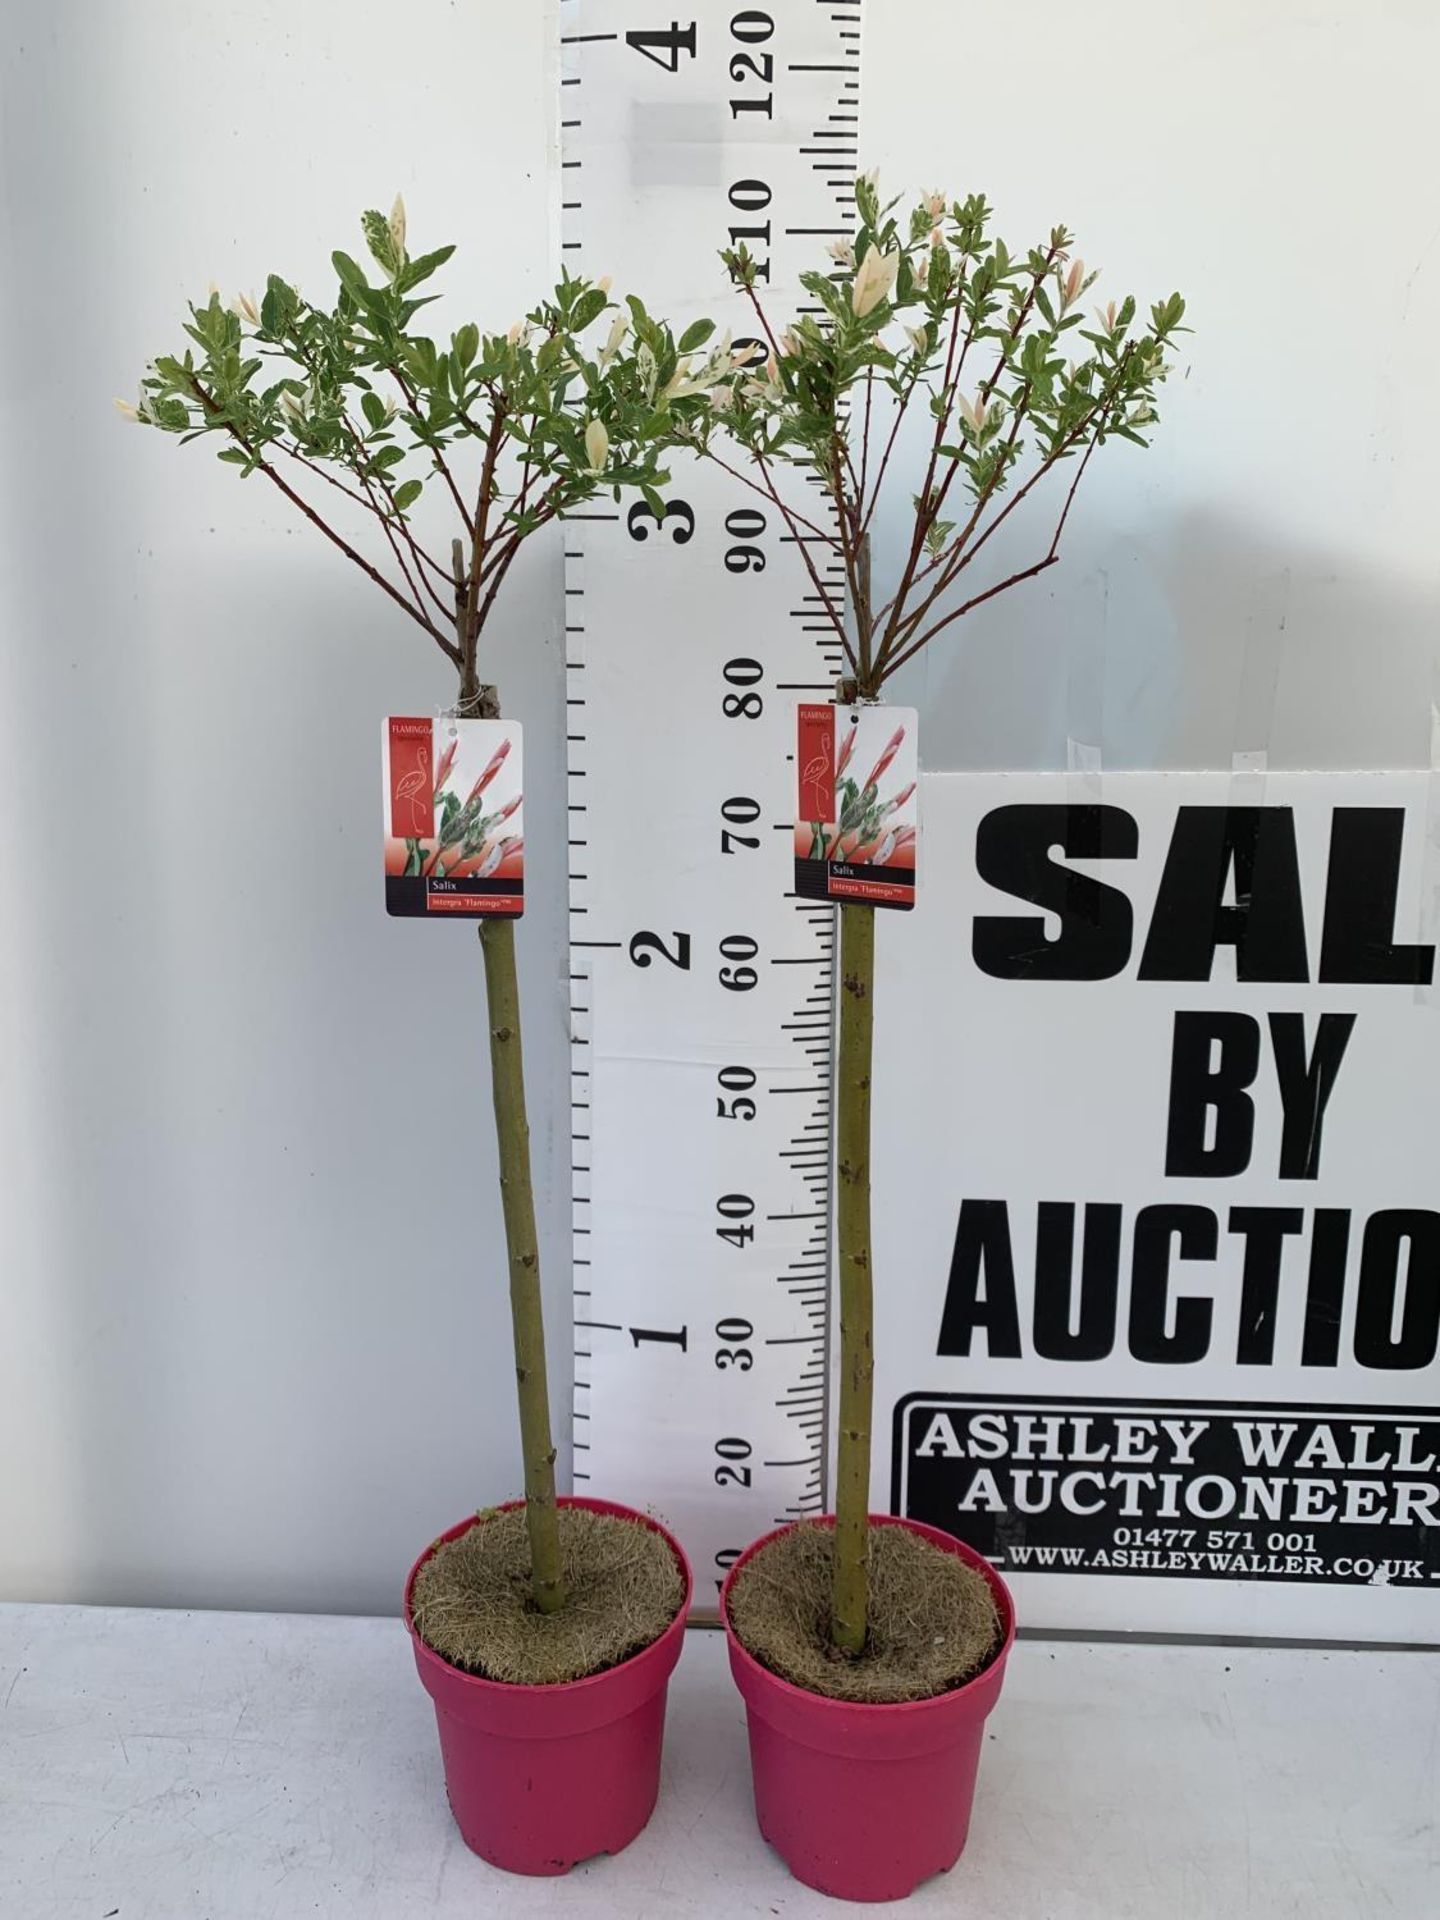 TWO STANDARD SALIX INTEGRA 'FLAMINGO' OVER 110CM IN HEIGHT IN 3 LTR POTS PLUS VAT TO BE SOLD FOR THE - Image 2 of 8